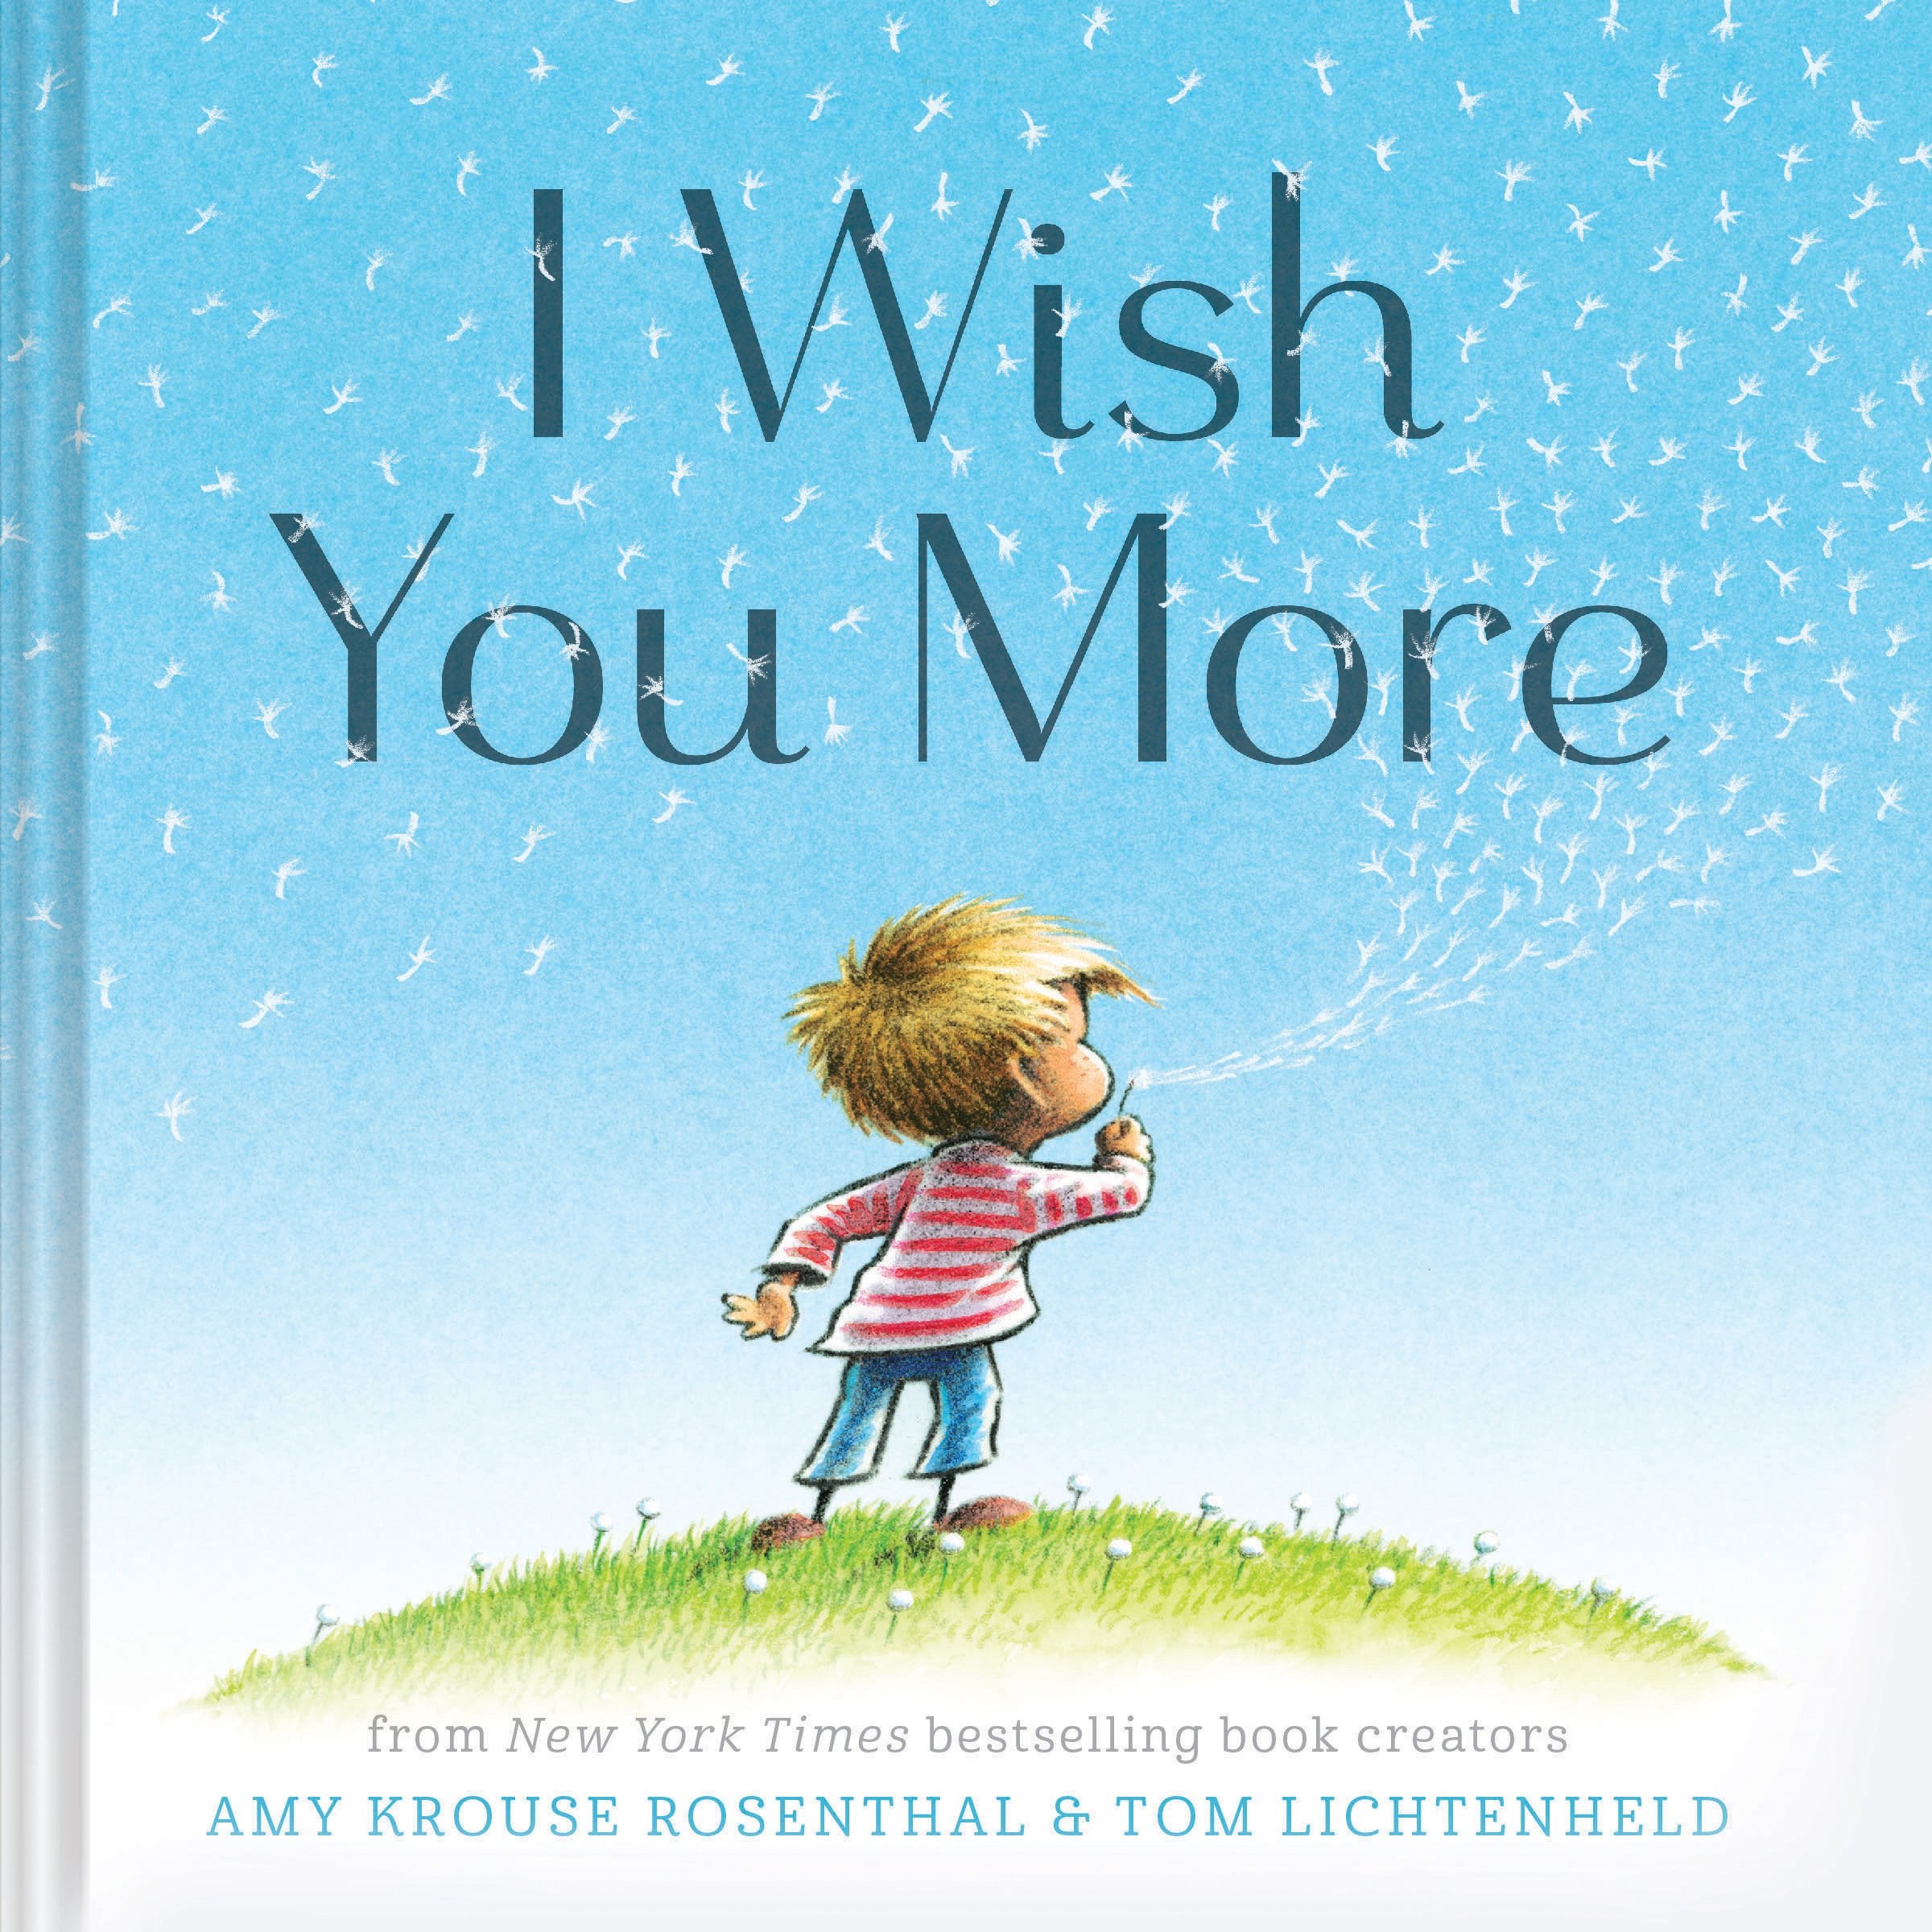 I Wish You More (Encouragement Gifts for Kids, Uplifting Books for Graduation) by Rosenthal, Amy Krouse